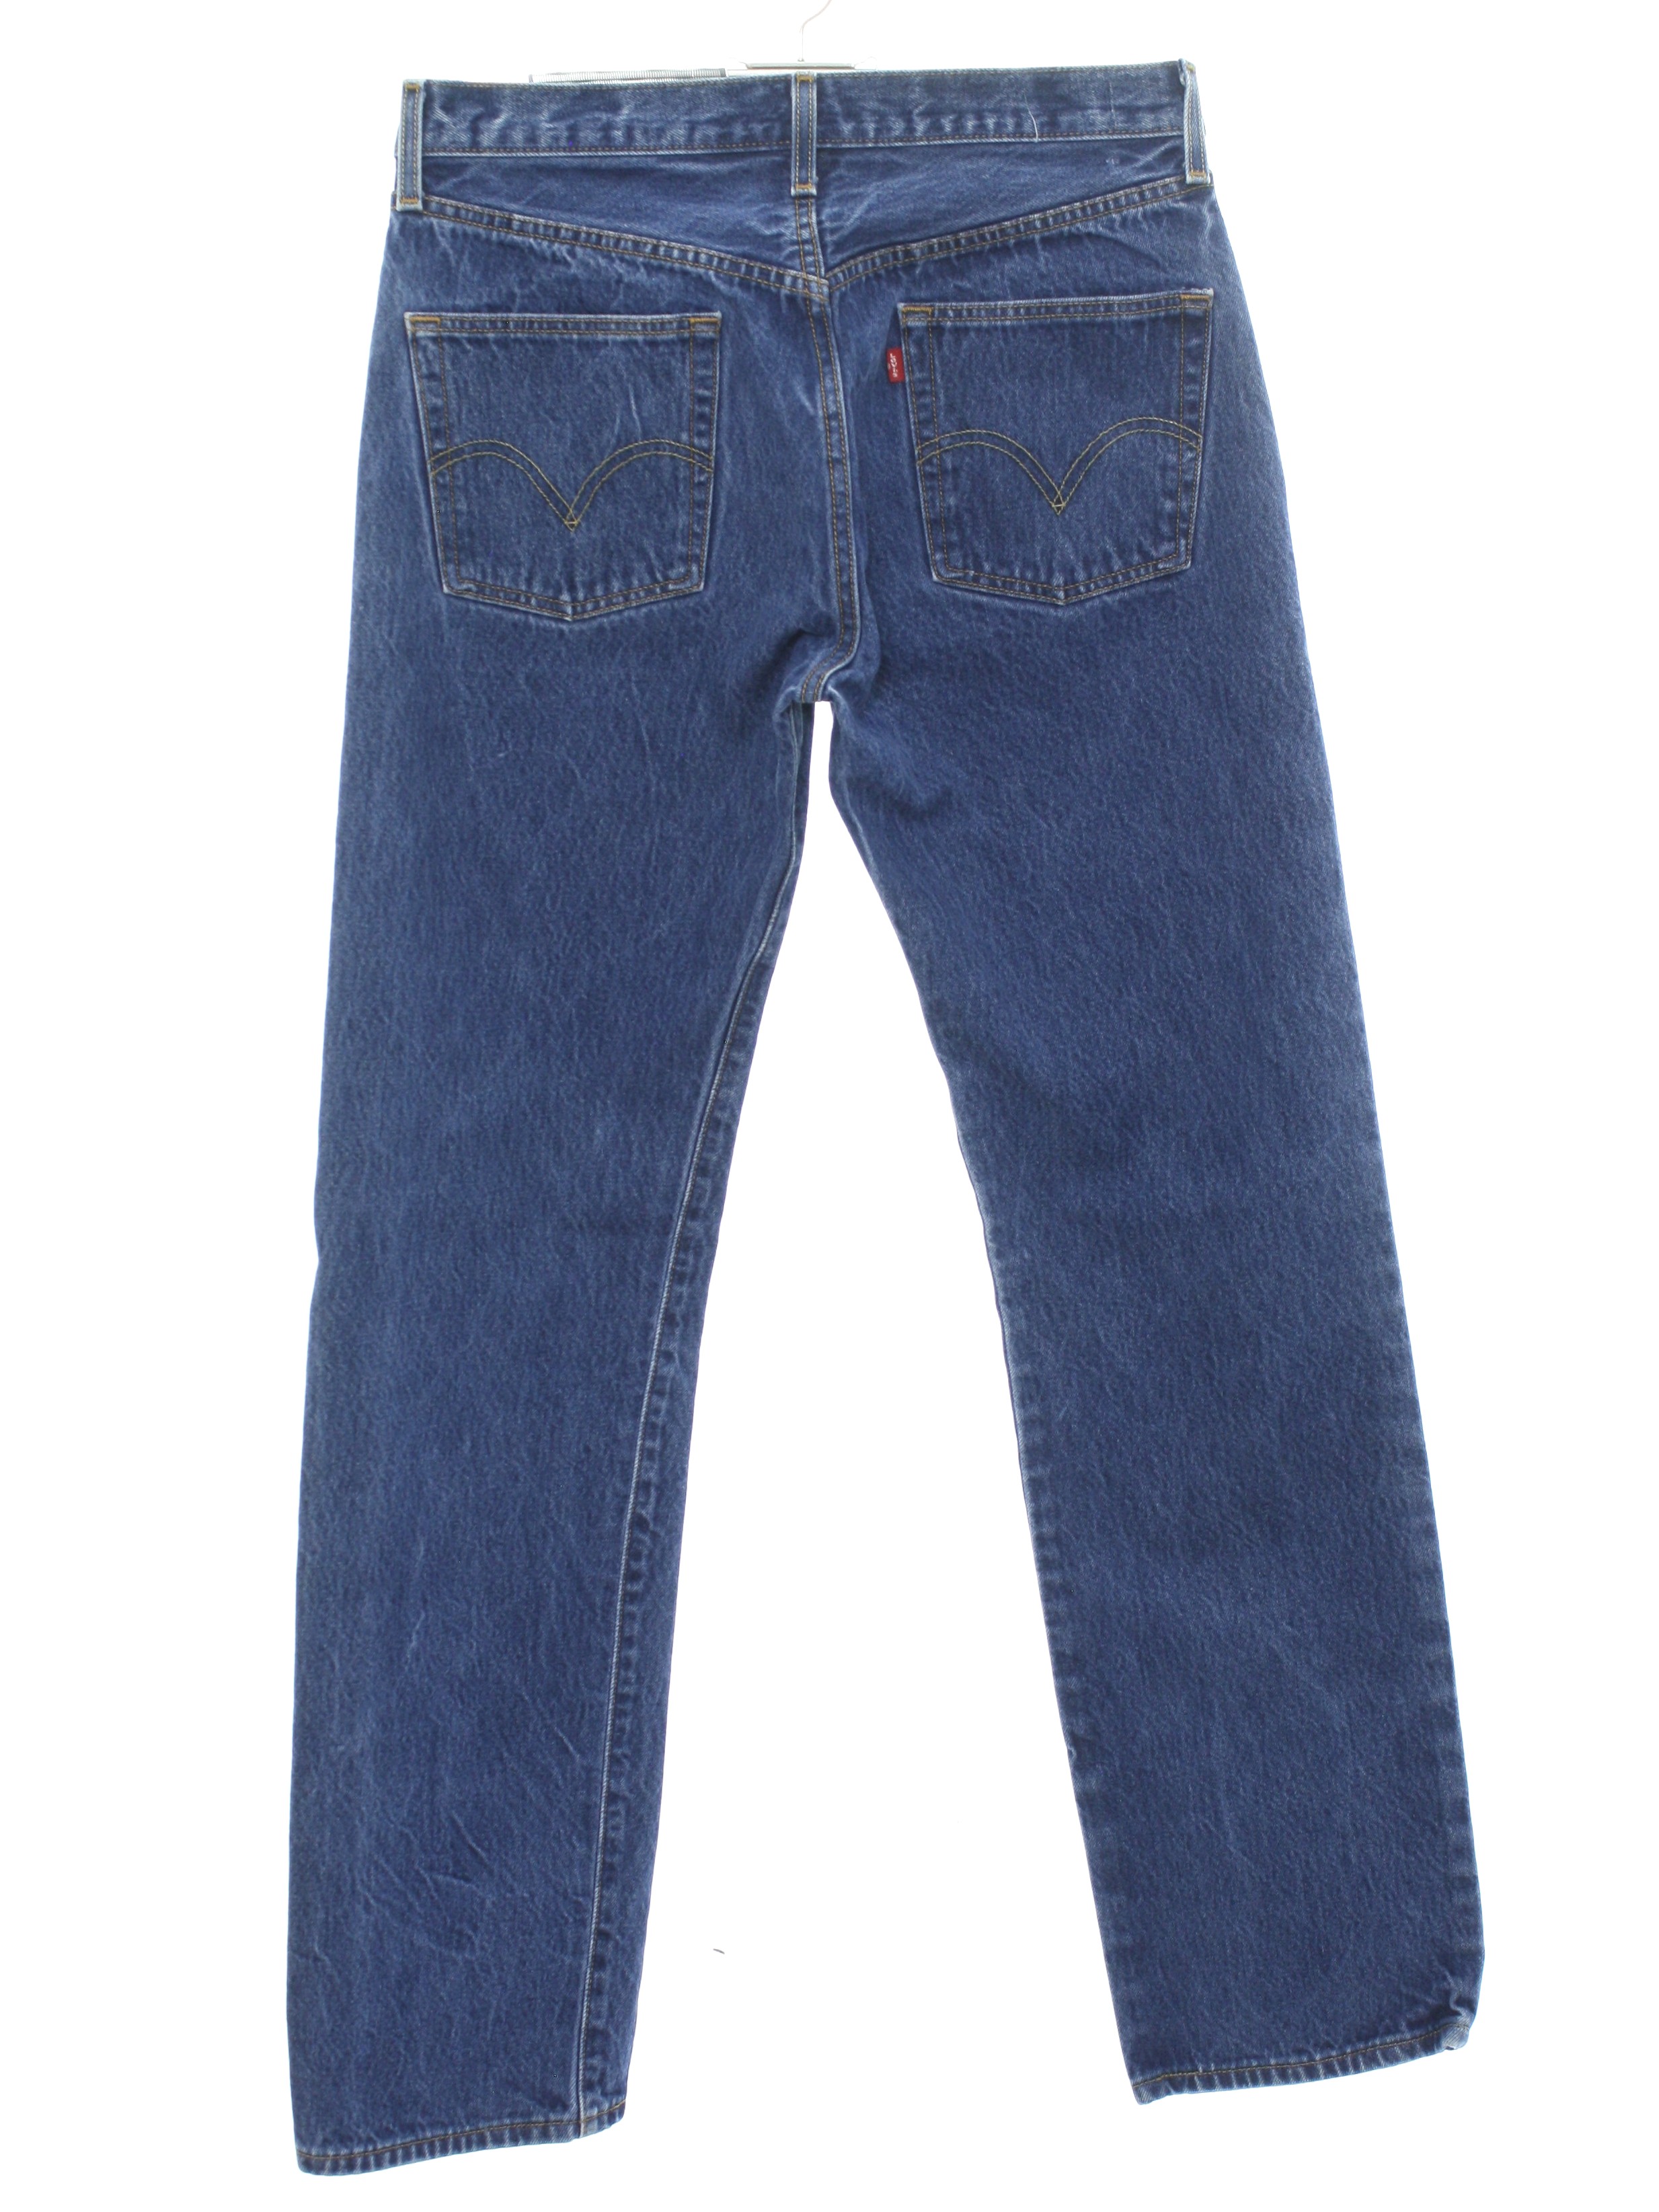 1990's Retro Pants: Early 90s -Levis- 501- Mens stone washed blue ...